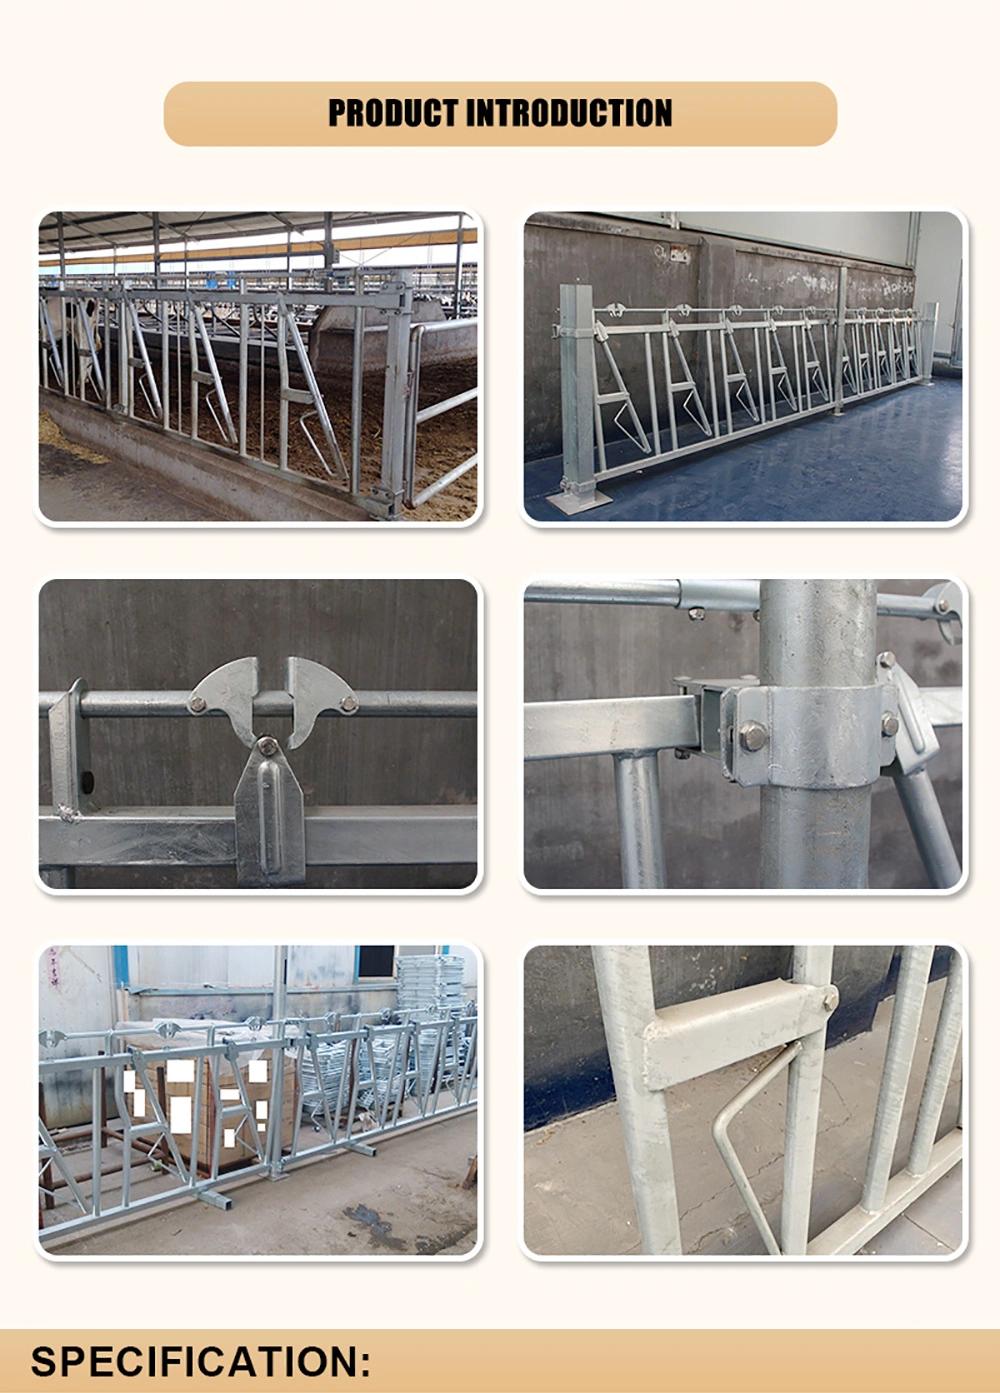 Galvanized Cow Cattle Headlock for Agriculture Husbandry Farm Equipment